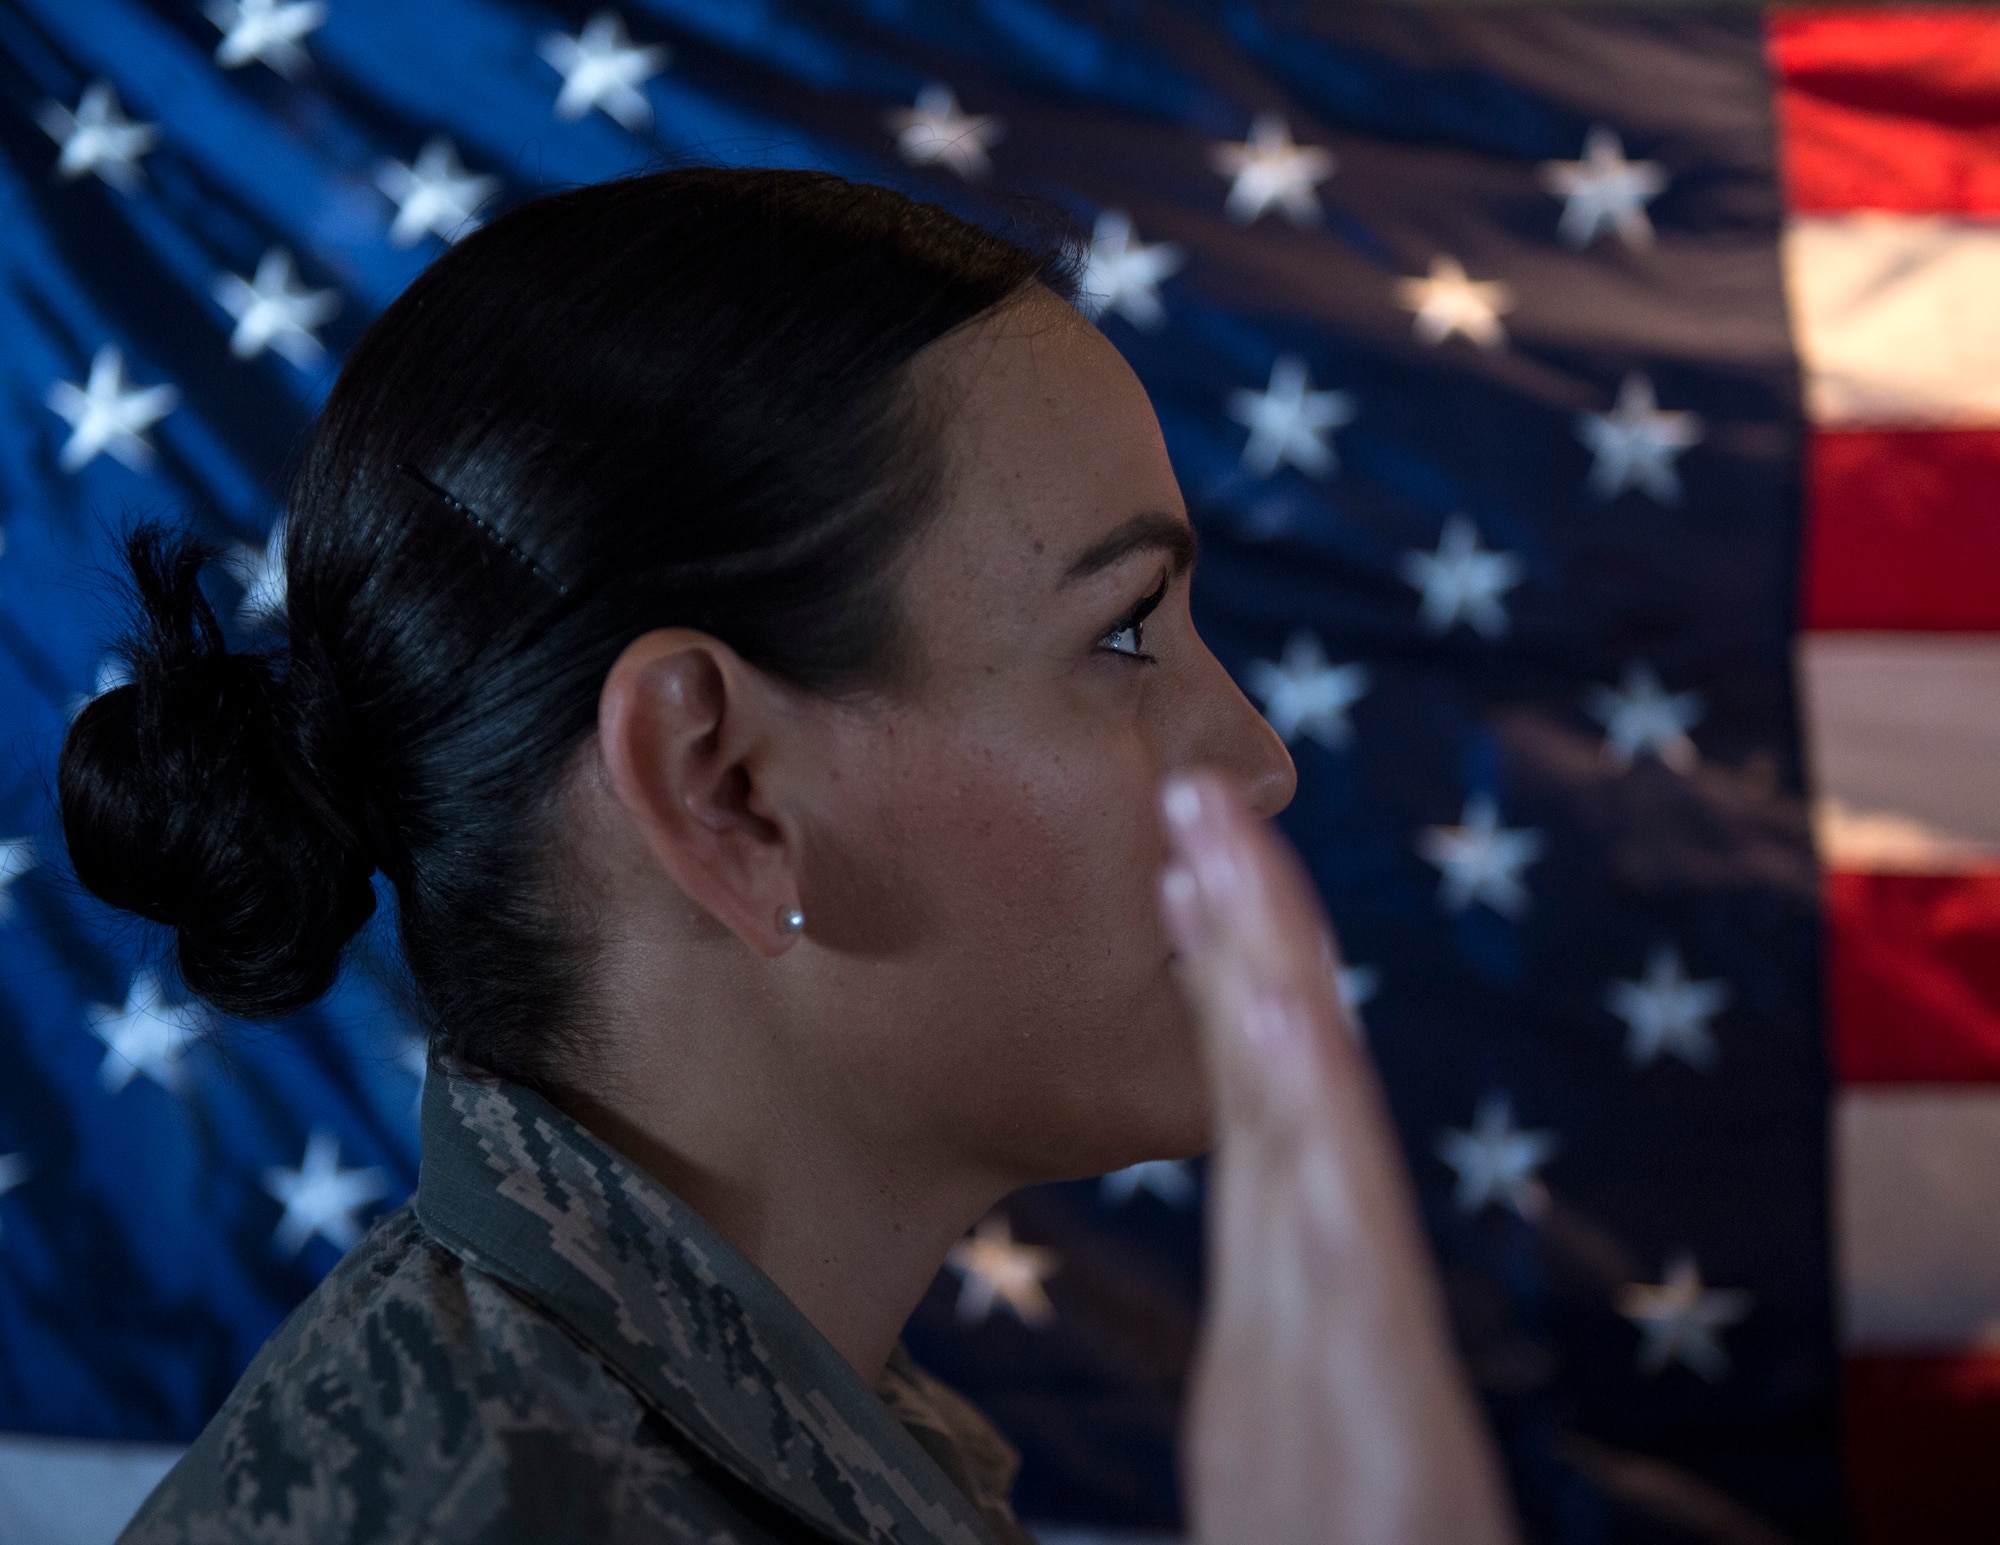 U.S. Air Force Staff Sgt. Isela Gonzalez, chaplain assistant with the 379th Air Expeditionary Wing Chapel, takes the oath of enlistment on board a C-130 Hercules from the 746th Expeditionary Airlift Squadron at an undisclosed location in Southwest Asia, Oct. 3, 2017.